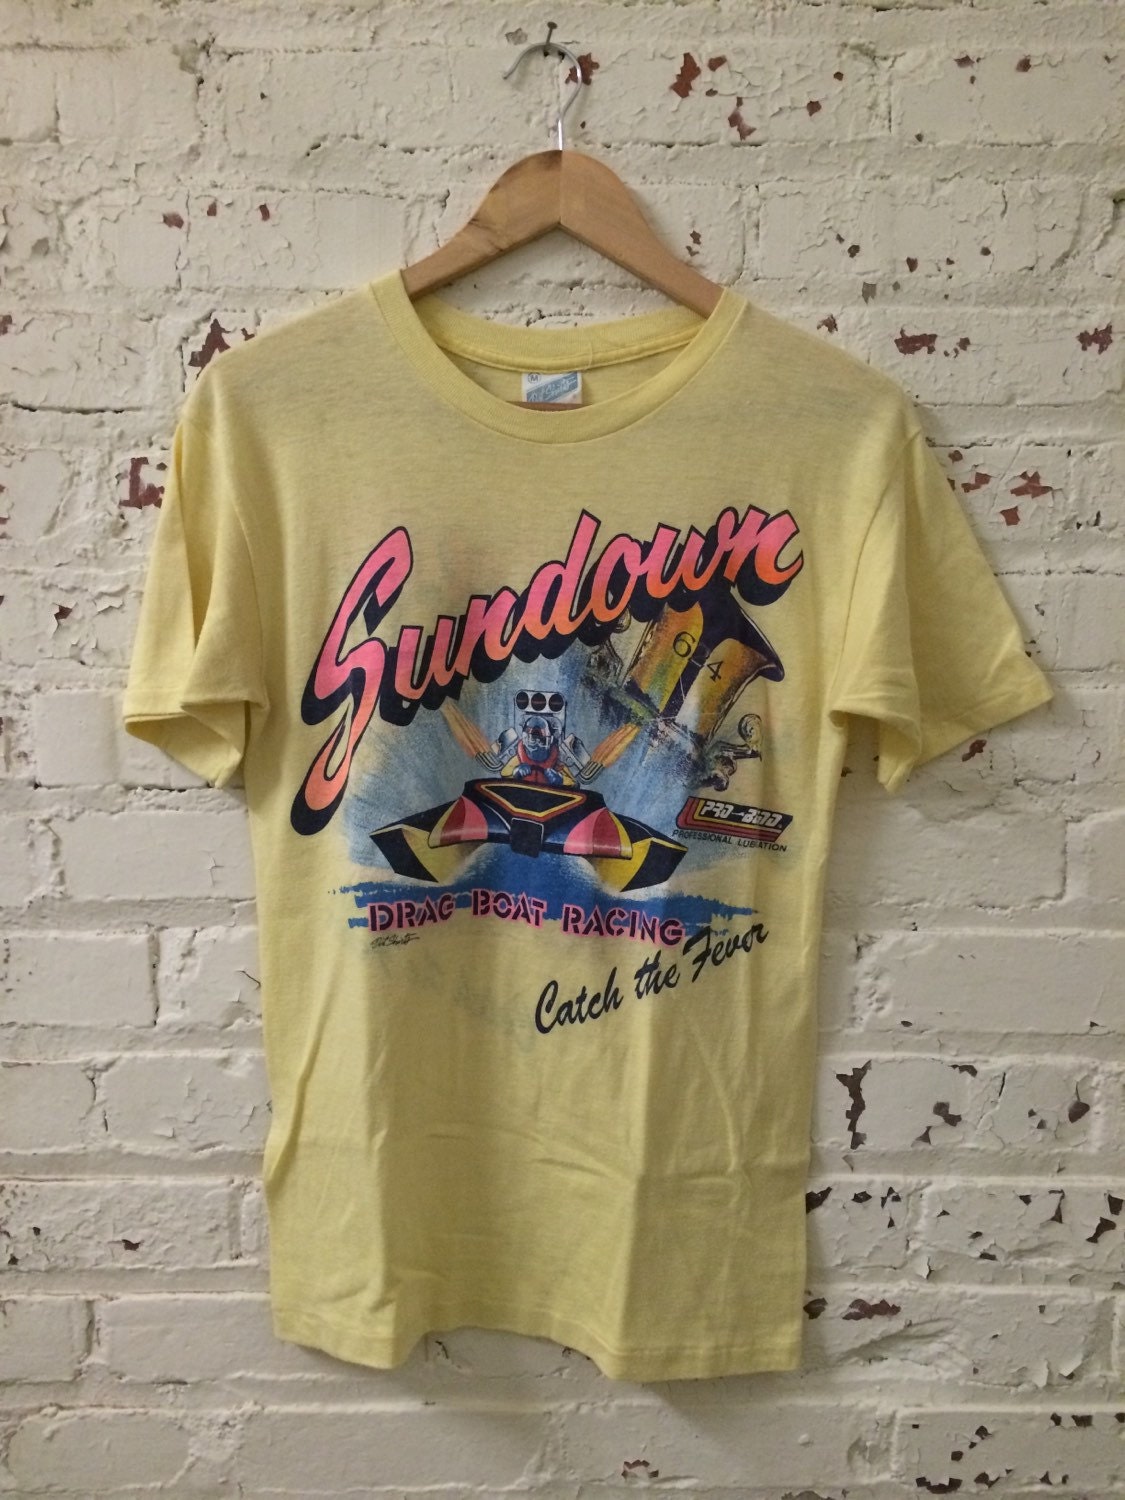 Vintage 1980s Sundown Drag Boat Racing Shirt Made in the USA